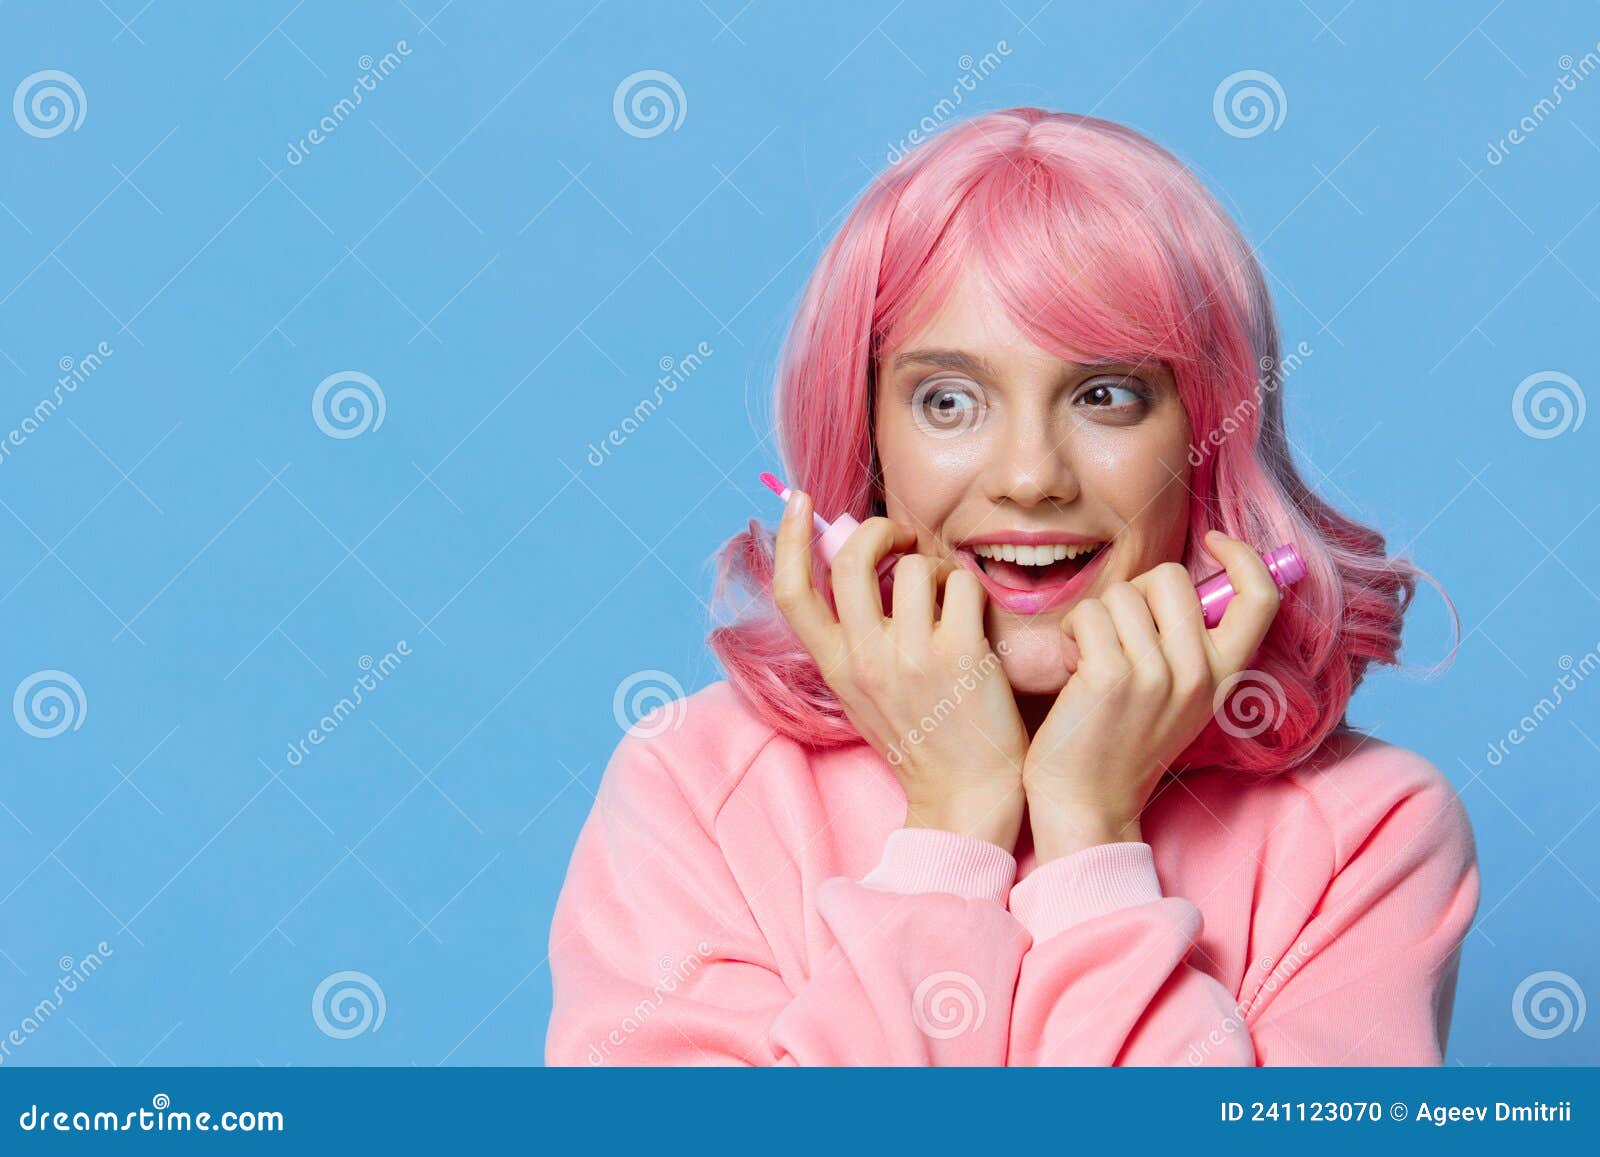 3. Stunning blue-eyed woman with pink hair - wide 7